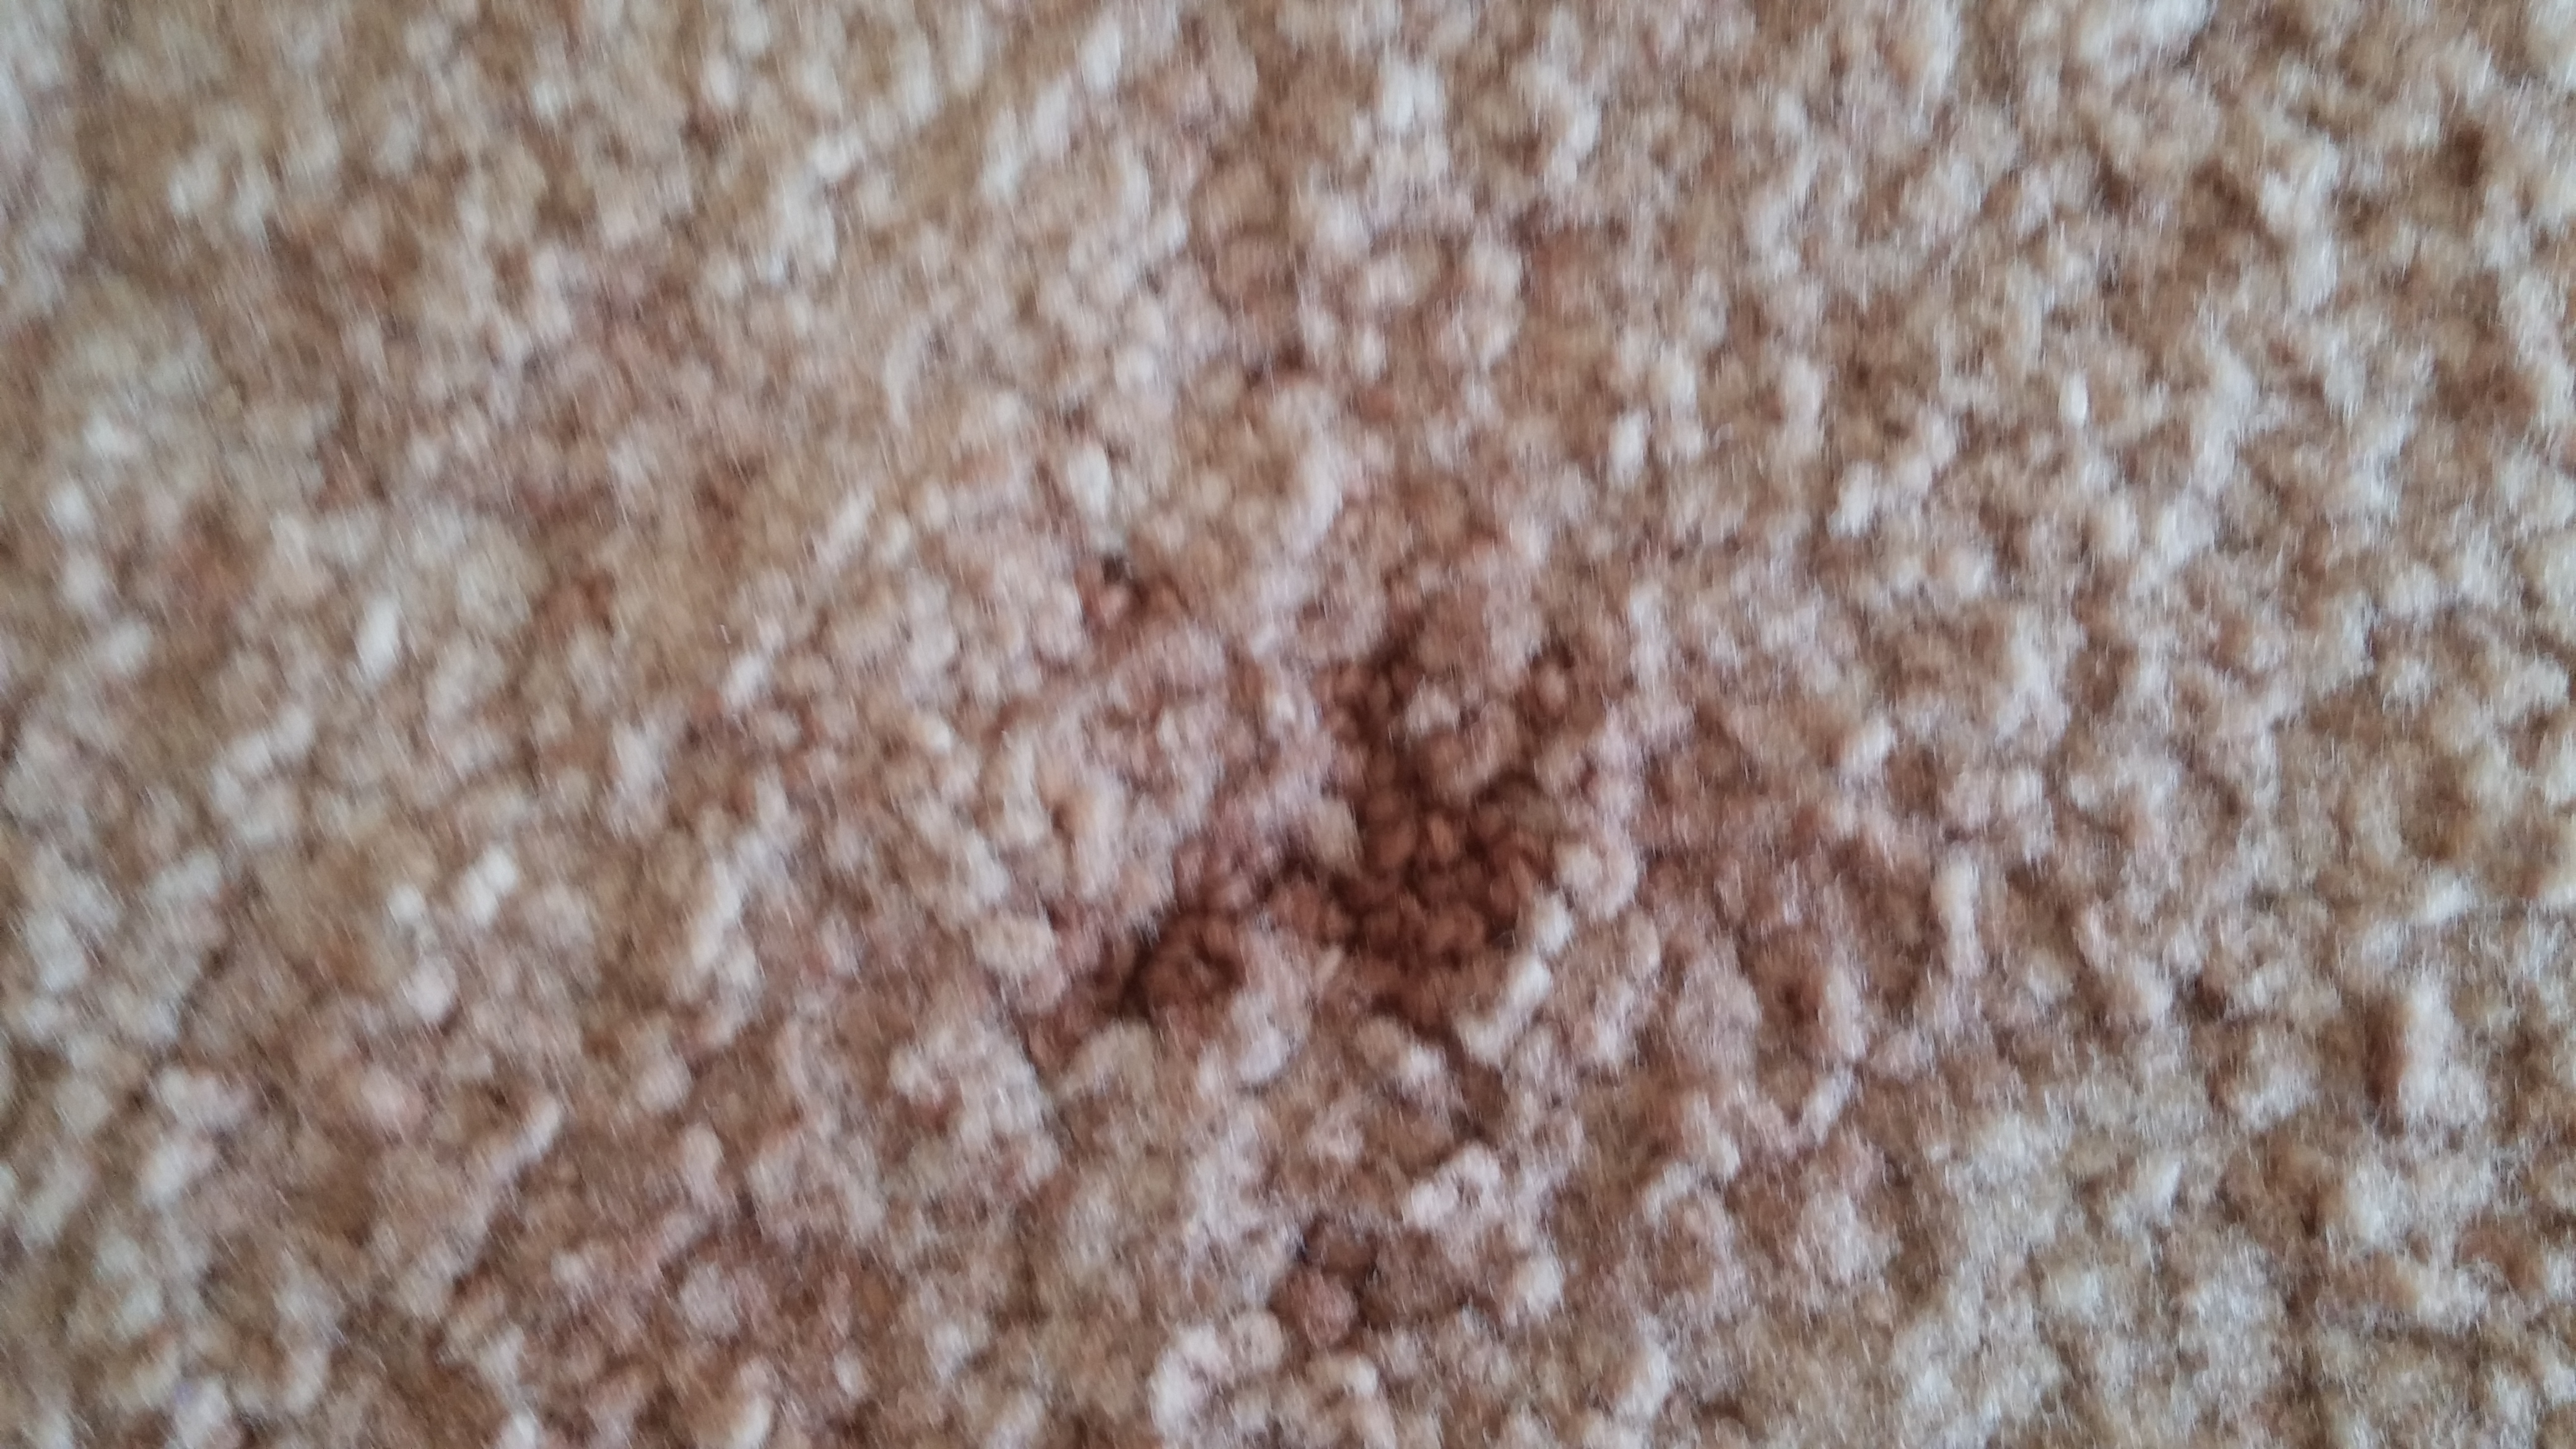 This is a big hole that ChemDRY created in my living room carpet